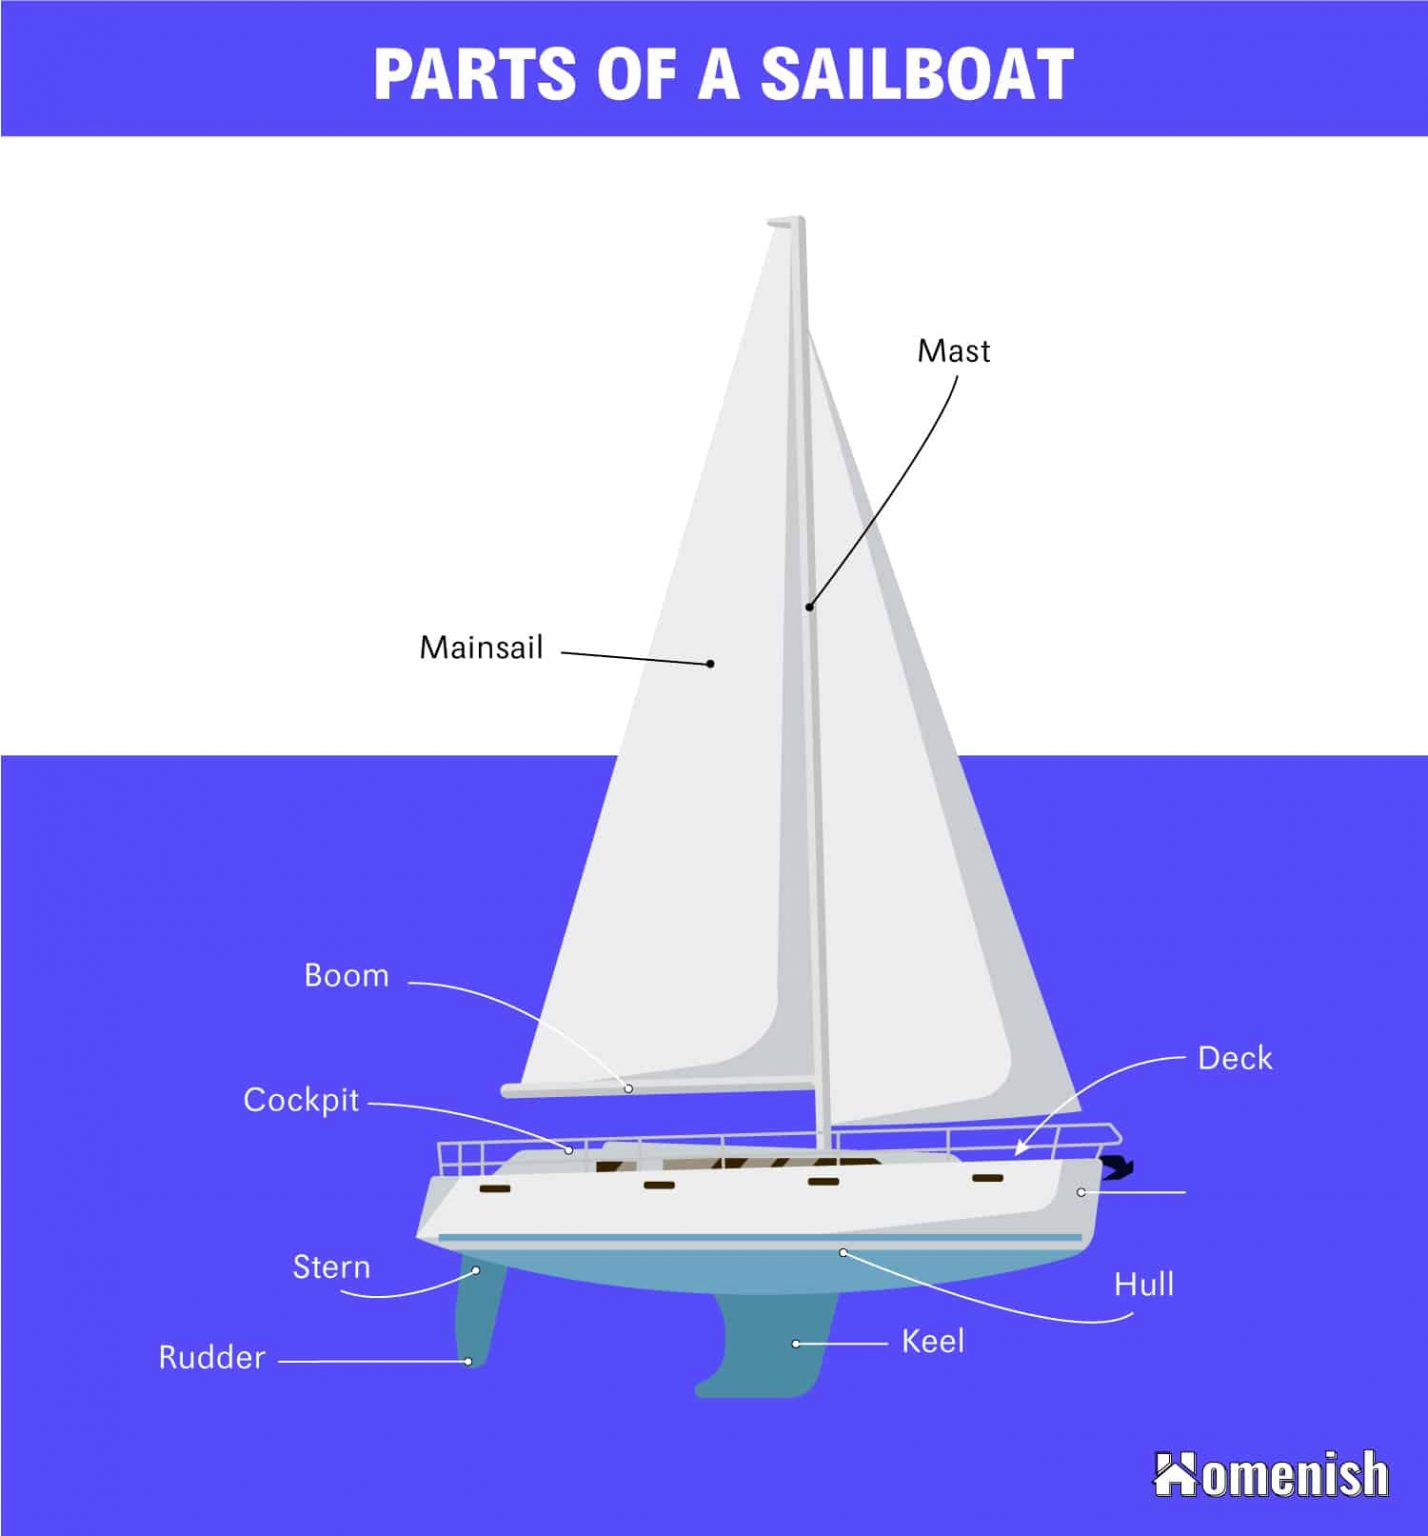 23 Parts of a Sailboat (Diagram Included) Homenish